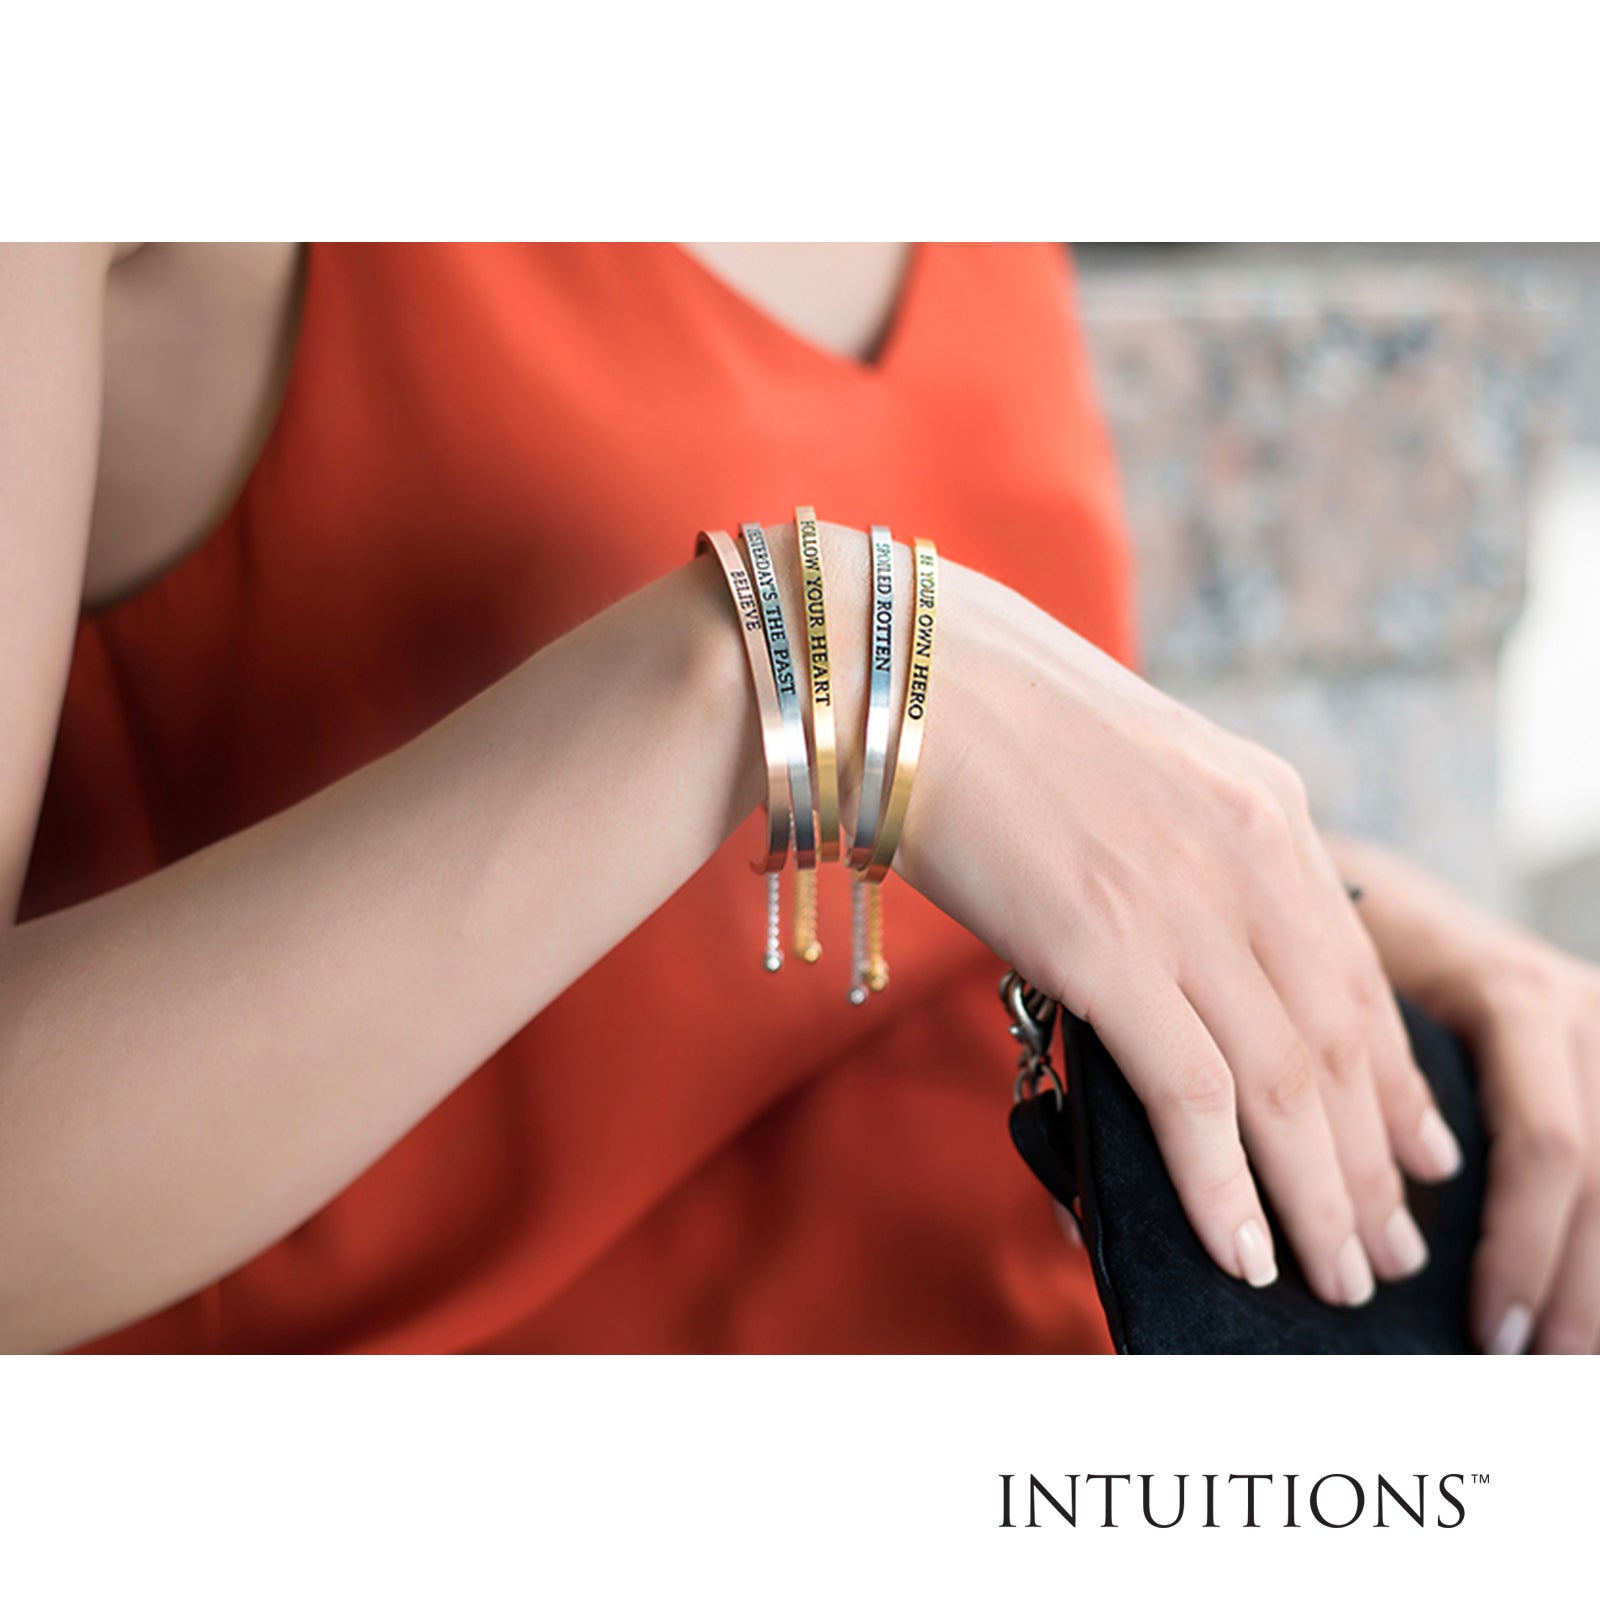 Intuitions Stainless Steel LIFE IS BEAUTIFUL Diamond Accent Adjustable Bracelet